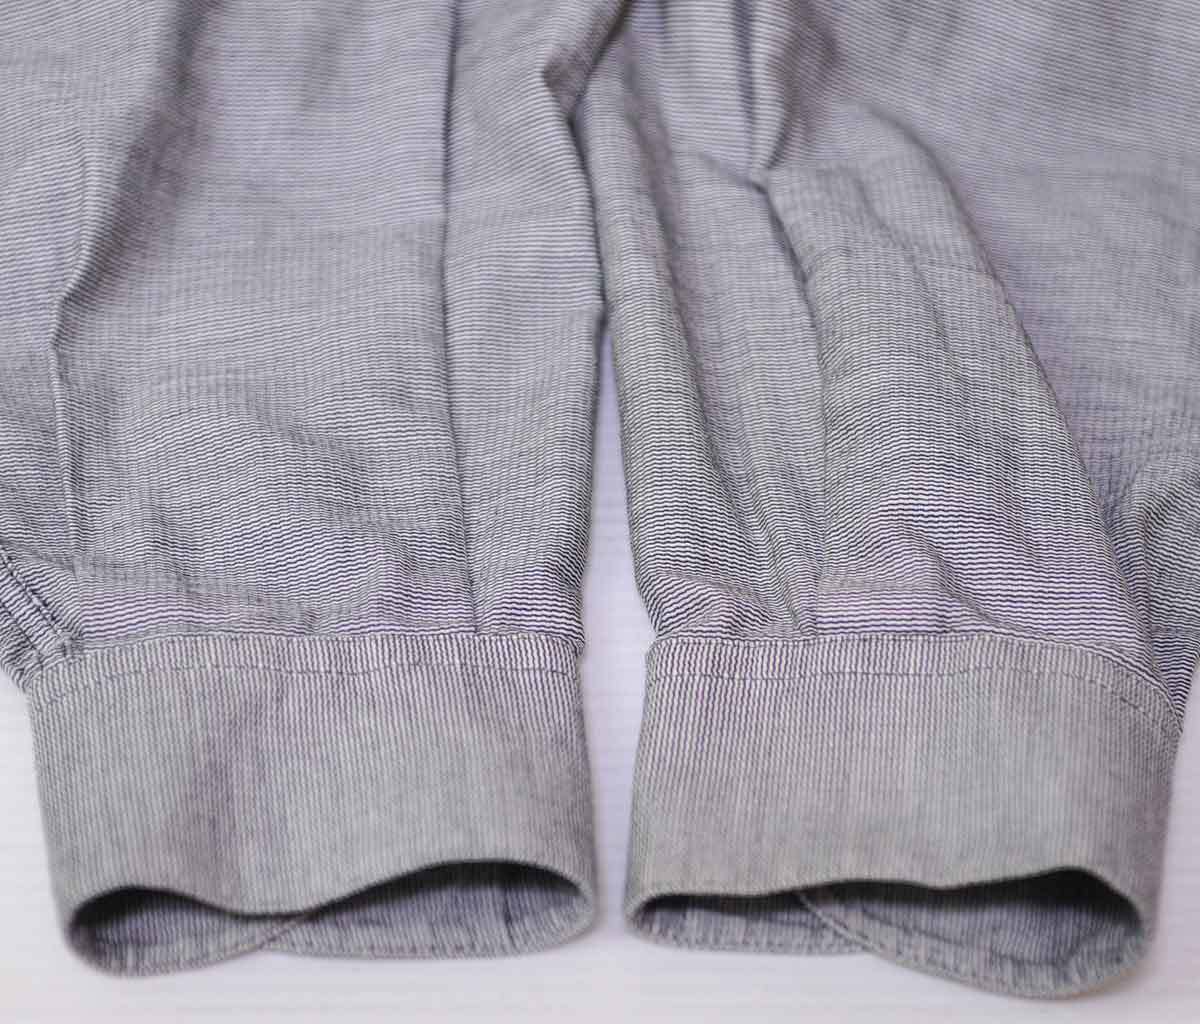  old clothes * Iceberg long sleeve shirt sill Bester cat gray M use impression * hole xwp